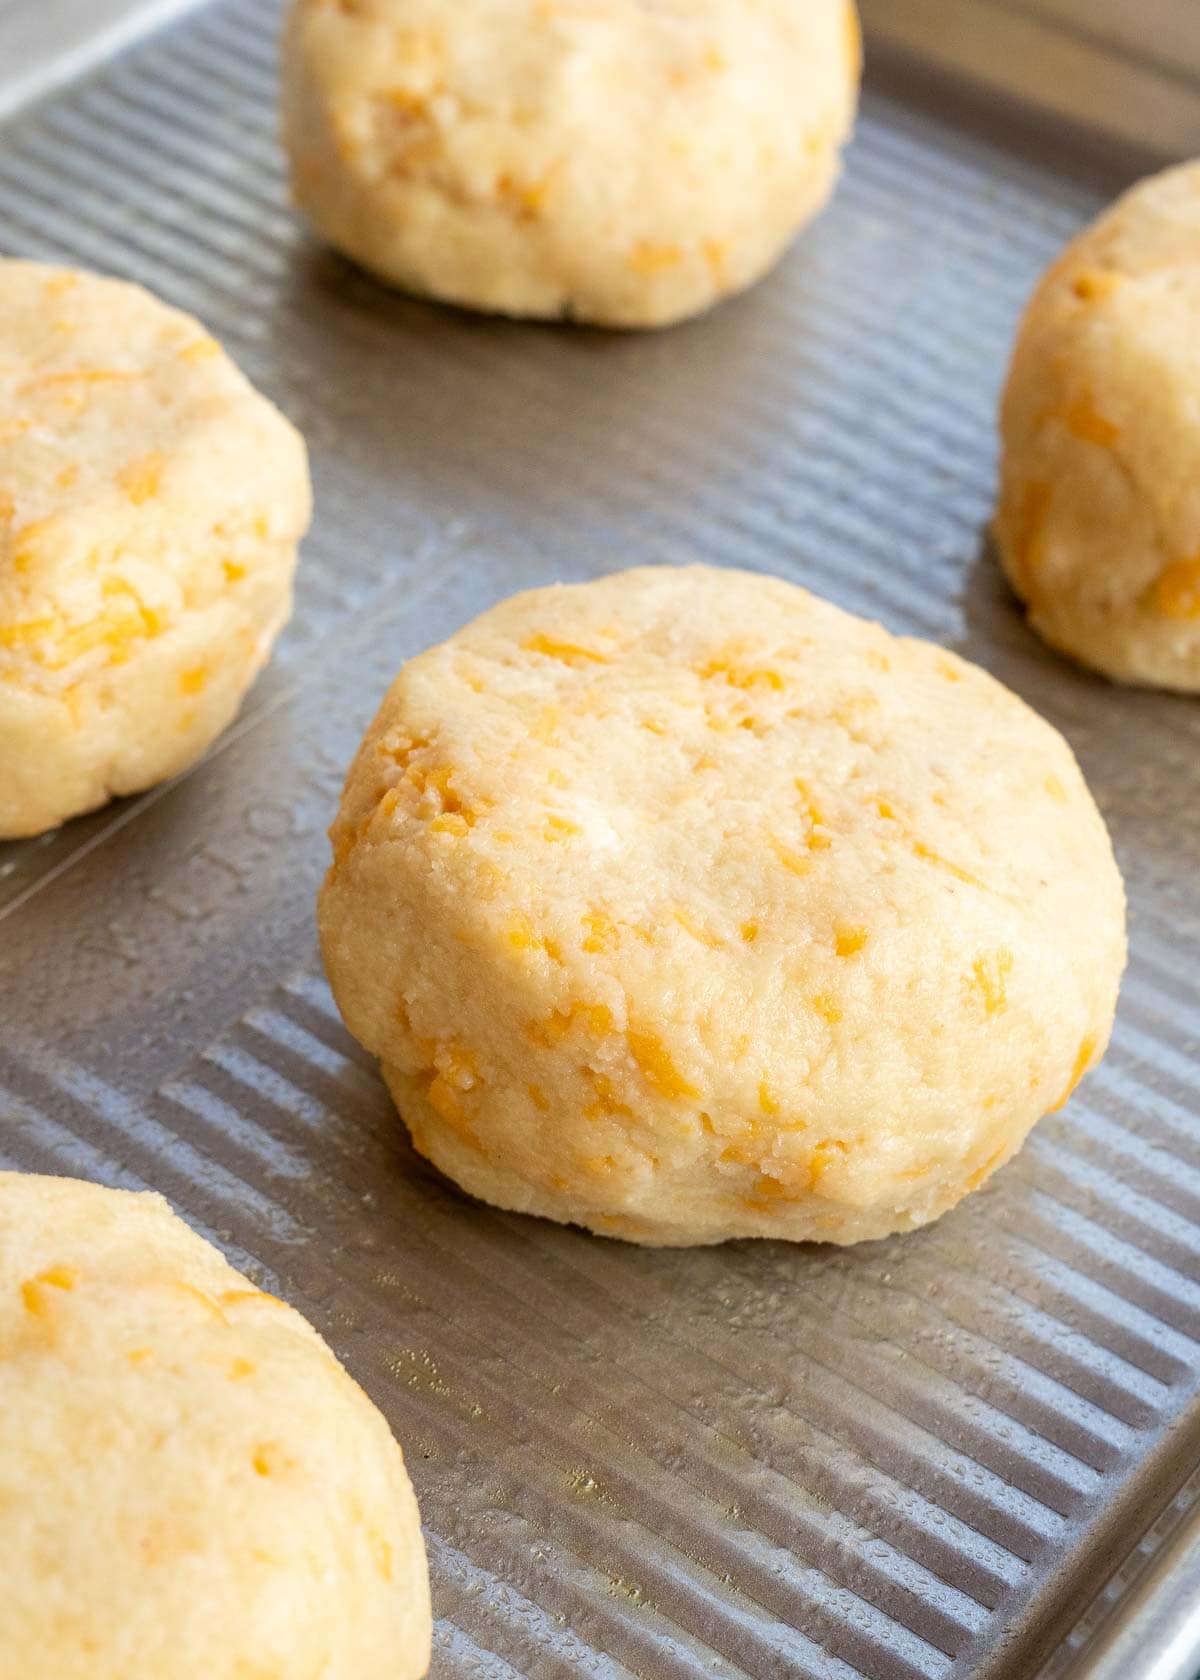 biscuit dough on a baking sheet